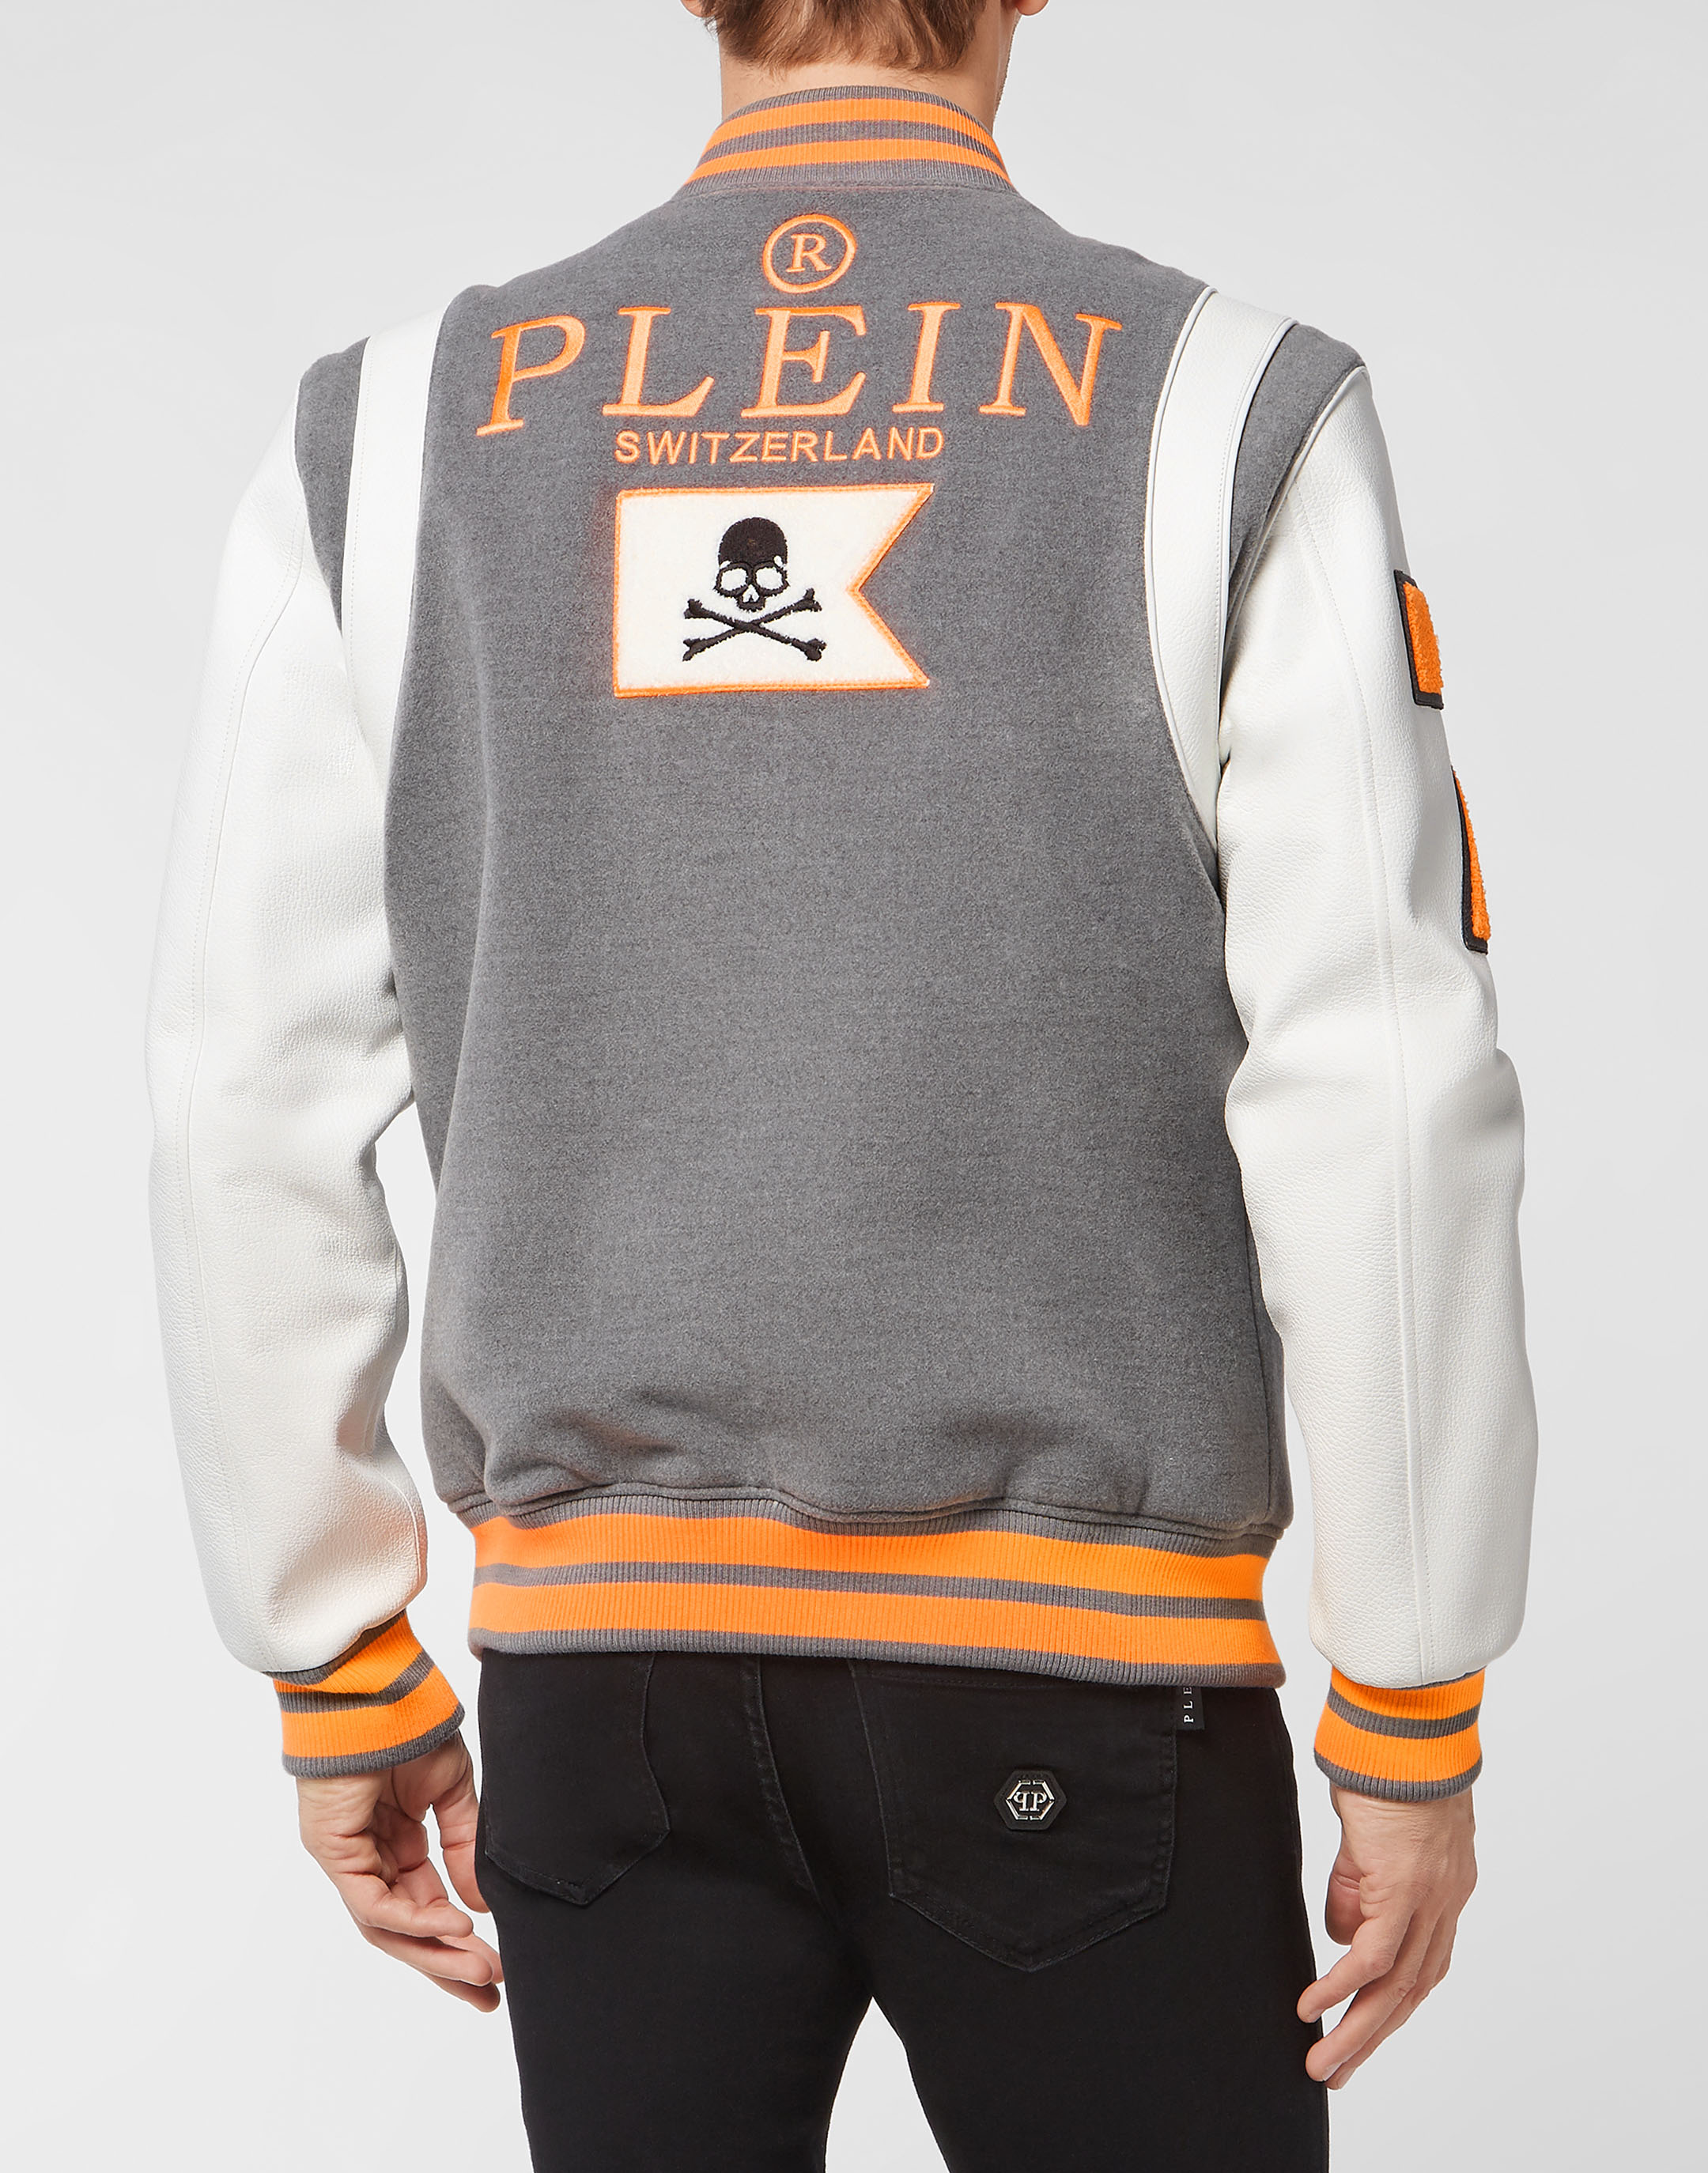 College Jacket Deer Leather Sleeves Patches | Philipp Plein Outlet